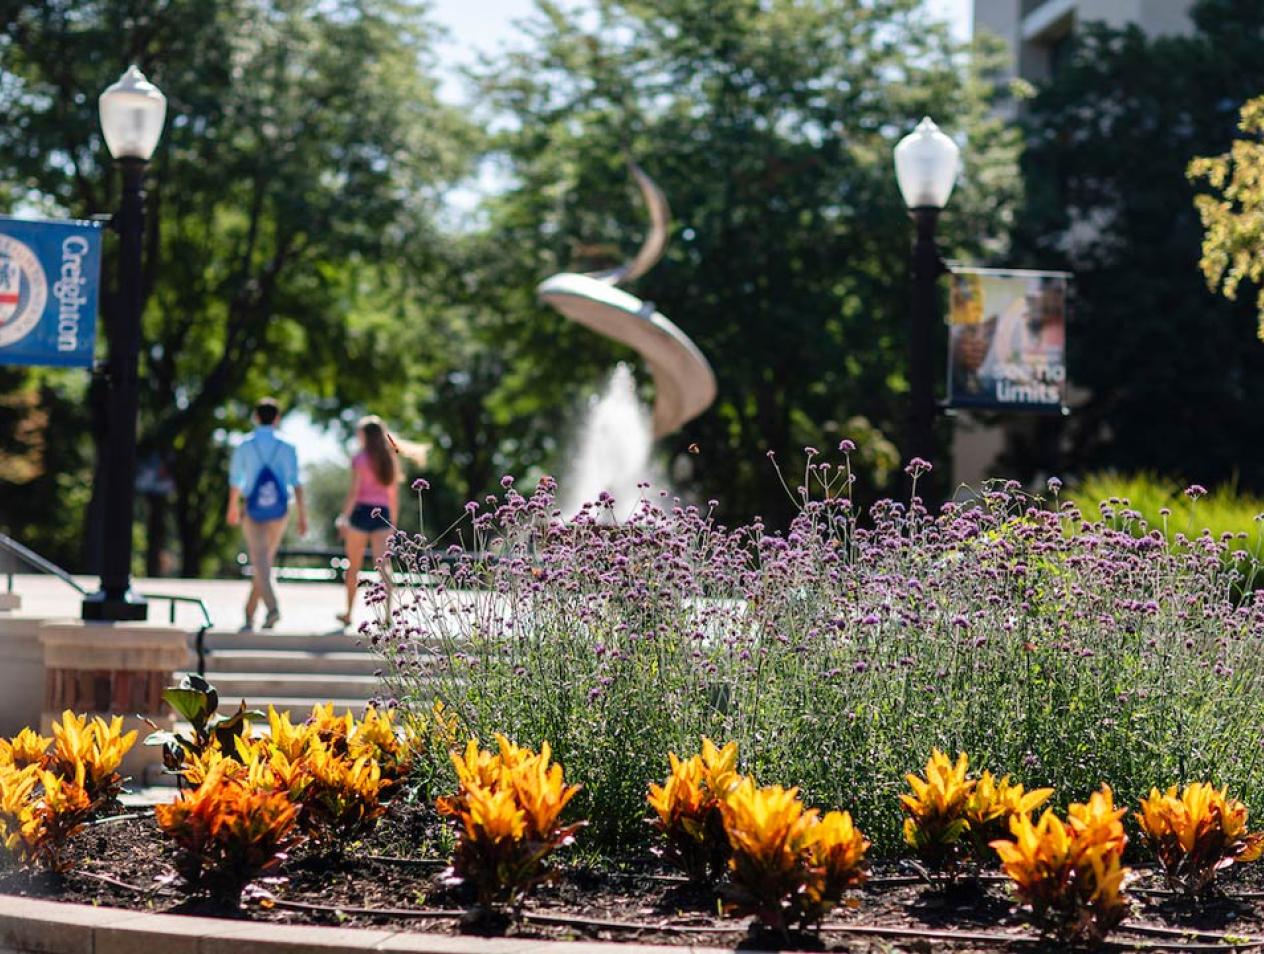 Programs for Creighton Faculty and Community